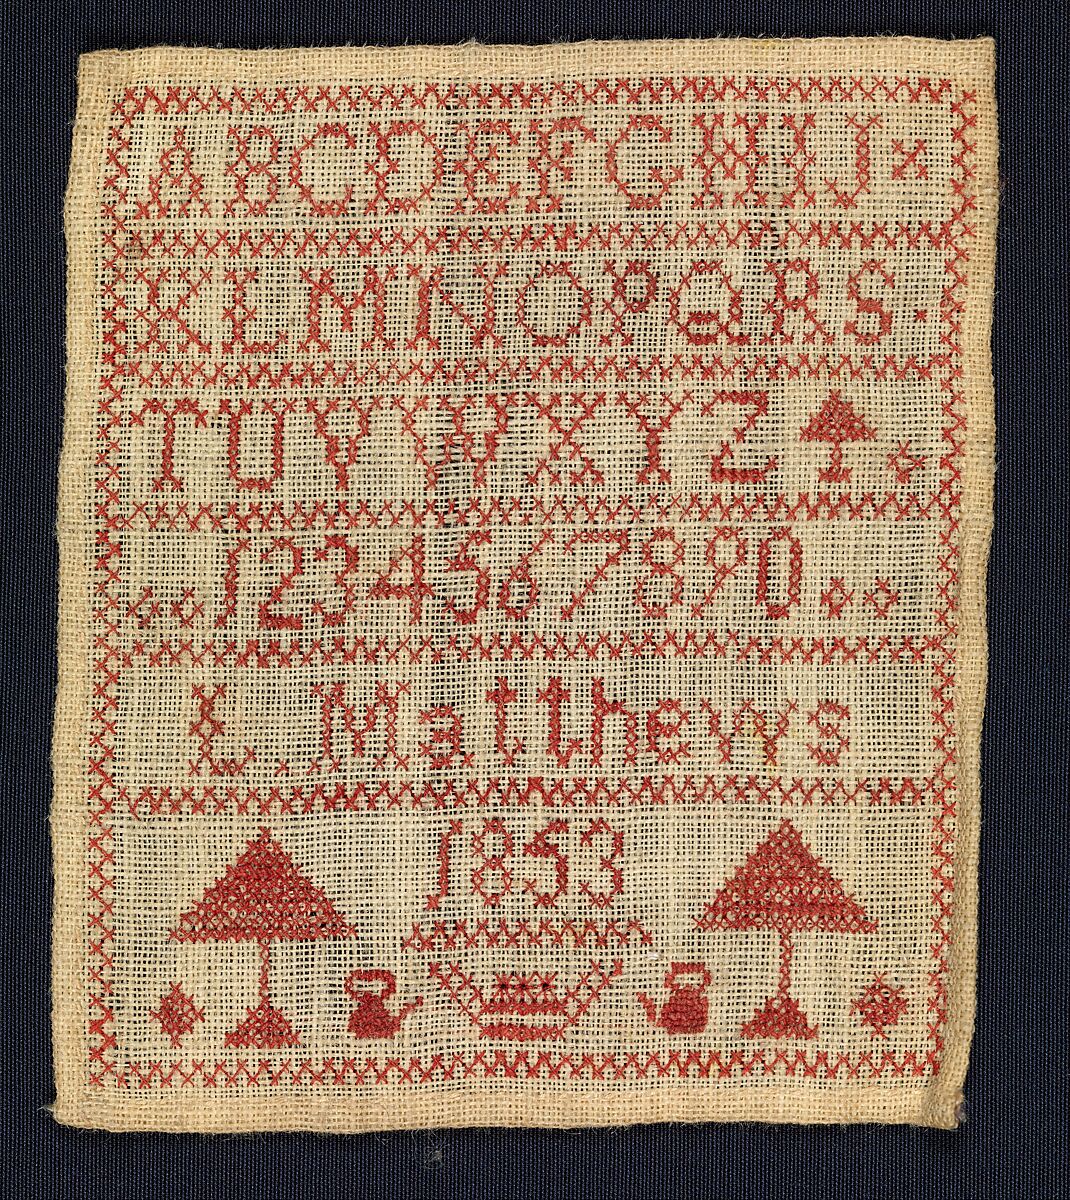 Sampler made at a charity school, L. Matthews (British), Cotton embroidery on linen, British 